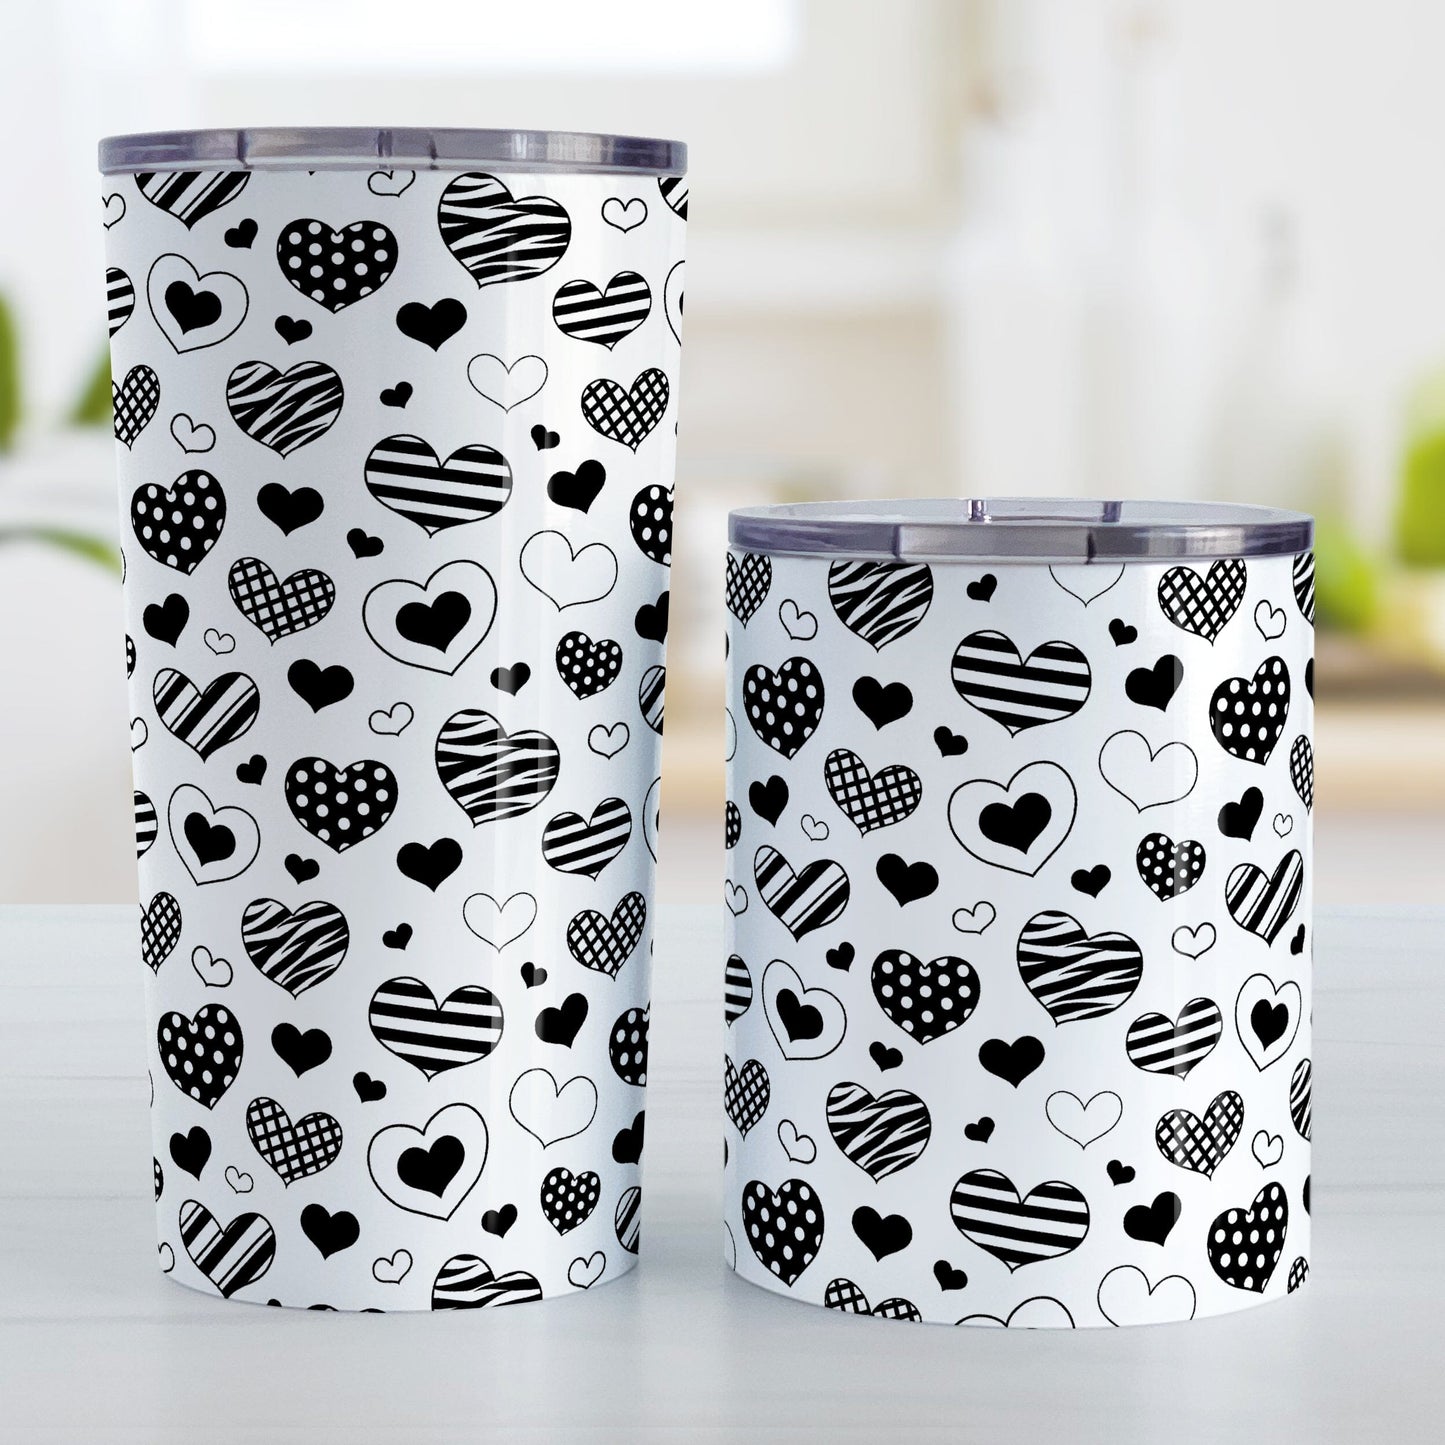 Black Heart Doodles Tumbler Cup (20oz or 10oz) at Amy's Coffee Mugs. Stainless steel tumbler cups designed with hand-drawn black heart doodles in a pattern that wraps around the cups. This cute heart pattern is perfect for Valentine's Day or for anyone who loves hearts and young-at-heart drawings. Photo shows both sized cups on a table next to each other. 